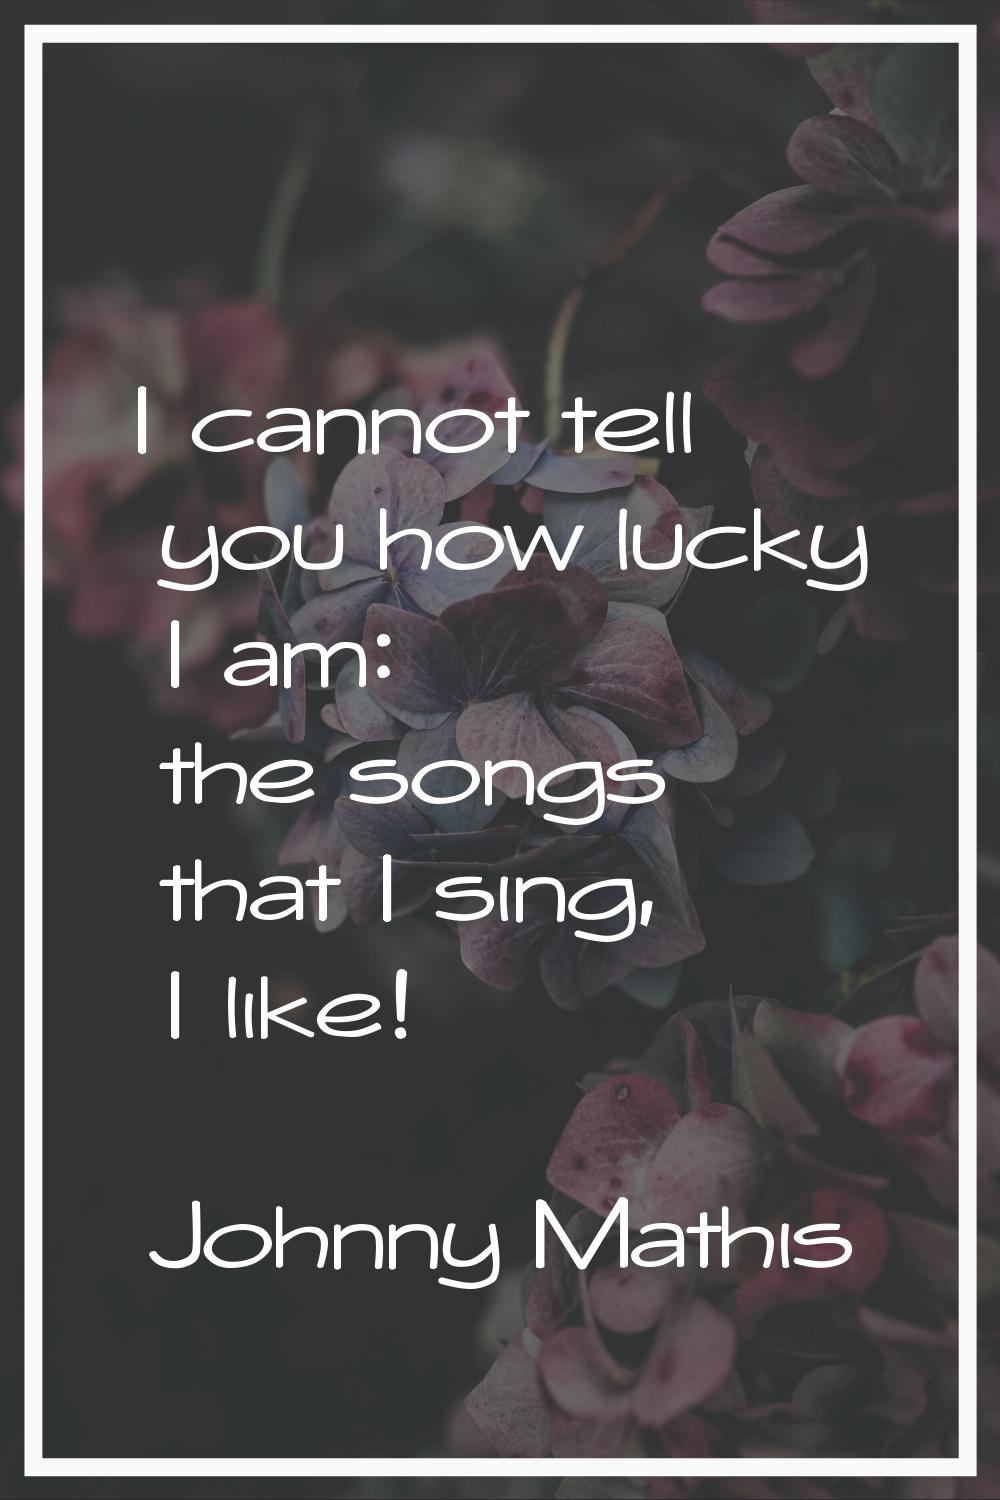 I cannot tell you how lucky I am: the songs that I sing, I like!